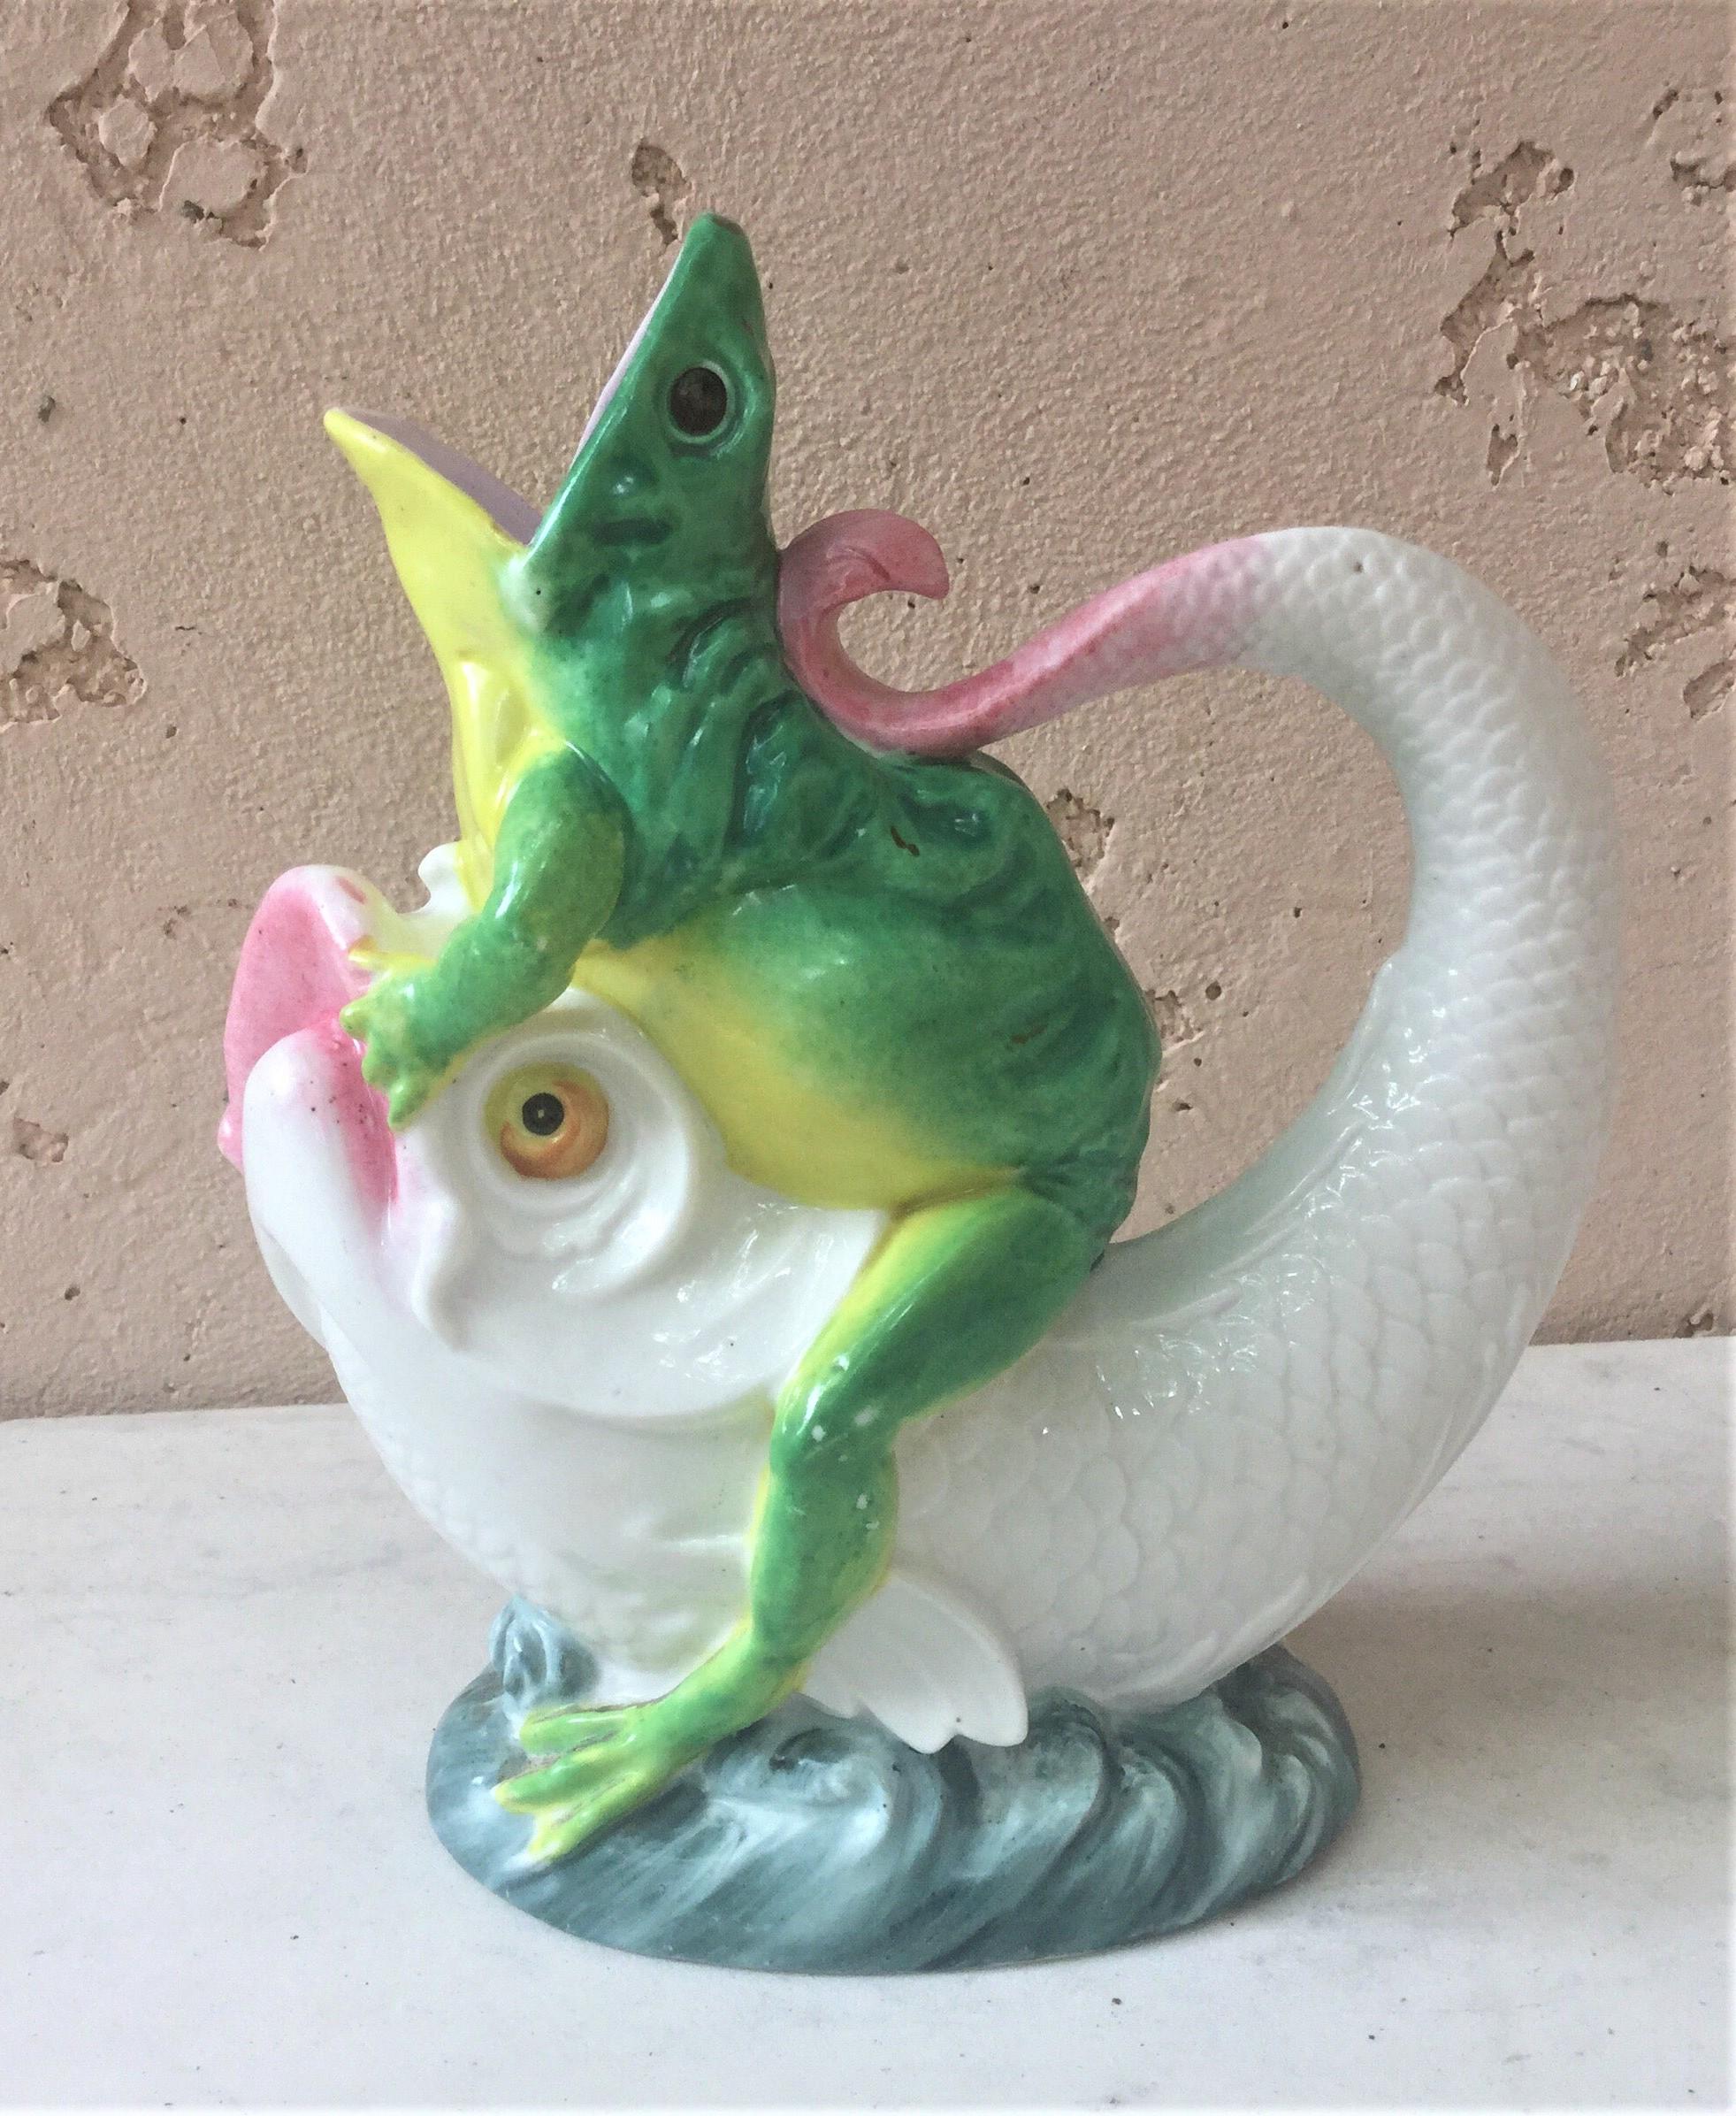 Porcelain jug modeled as an open mouthed frog riding a stylised fish riding waves circa 1870 (shape number 1971)
Reference / A similar example in Majolica was sold at Christie's (November 2005).
  